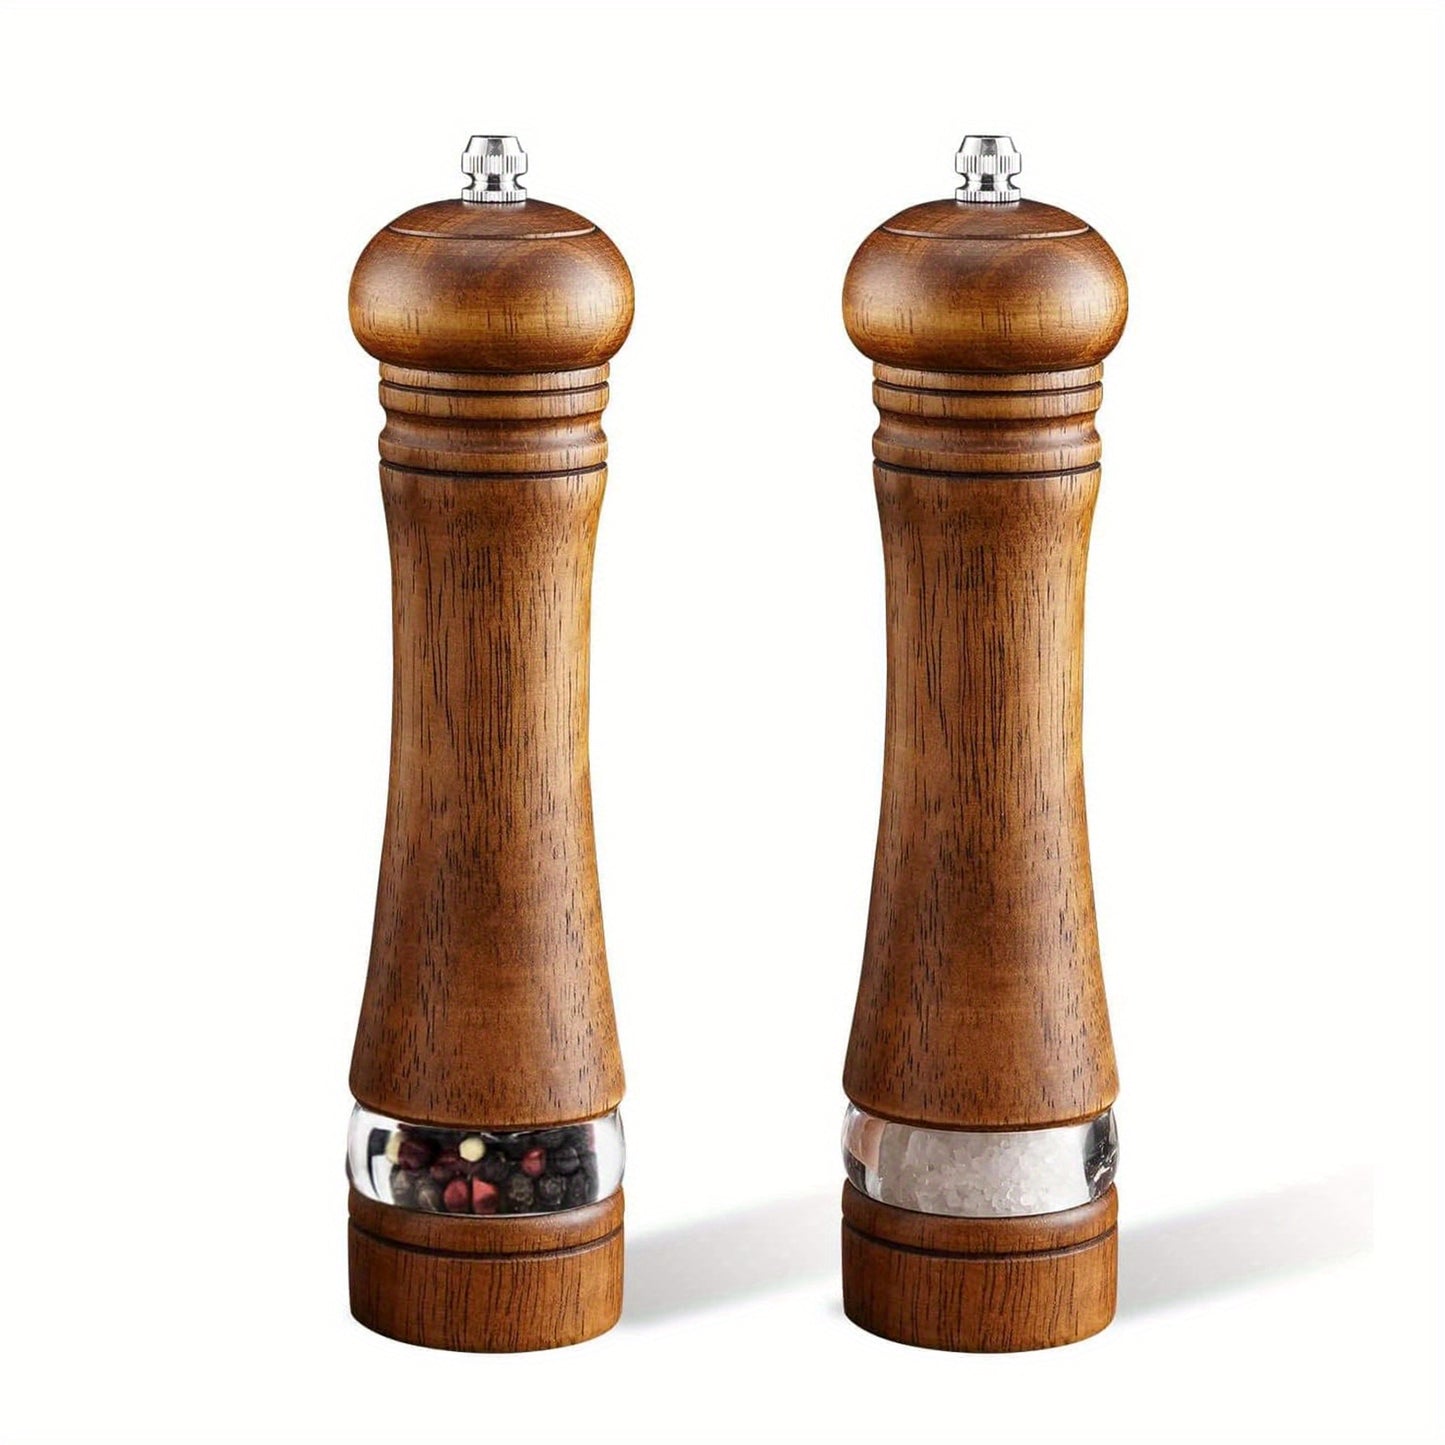 Wood Salt and Pepper Grinder Mills Sets, Classic Manual Salt Grinder Refillable Pepper Mill Sets with Acrylic Visible Window Adjustable Ceramic Grinding Rotor 8 inch 2 Pack